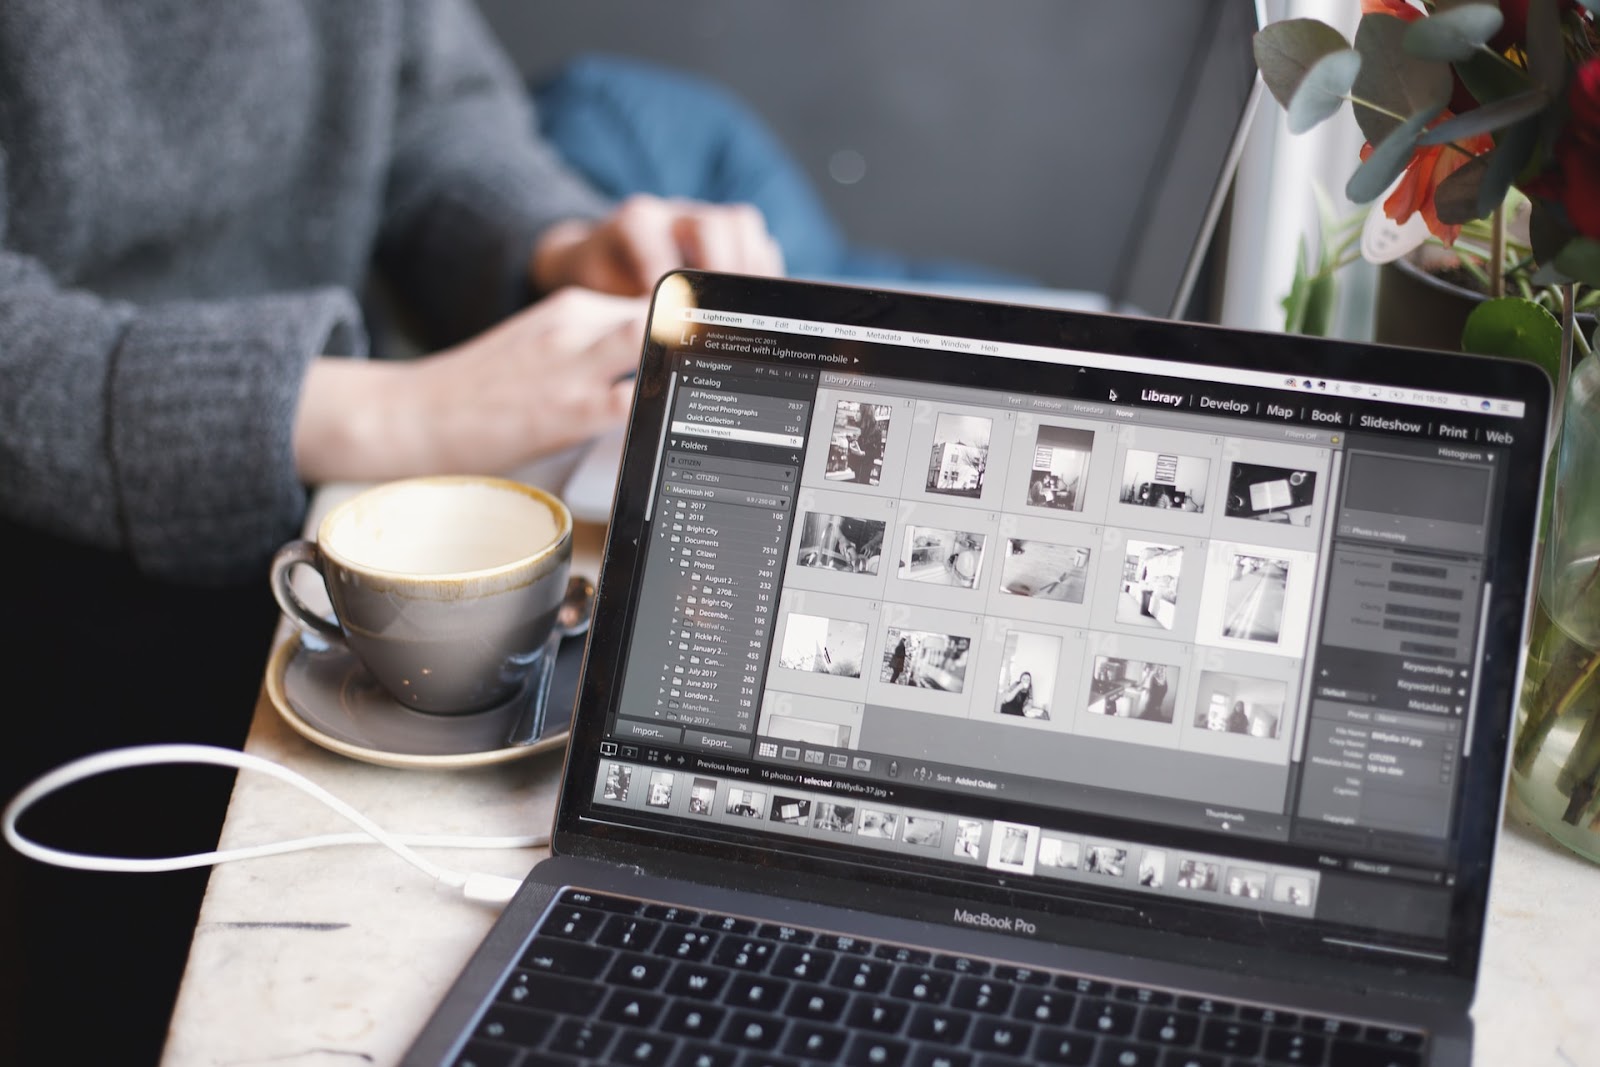 7 Great Ways to Make Your Photos Look Even Better During Editing